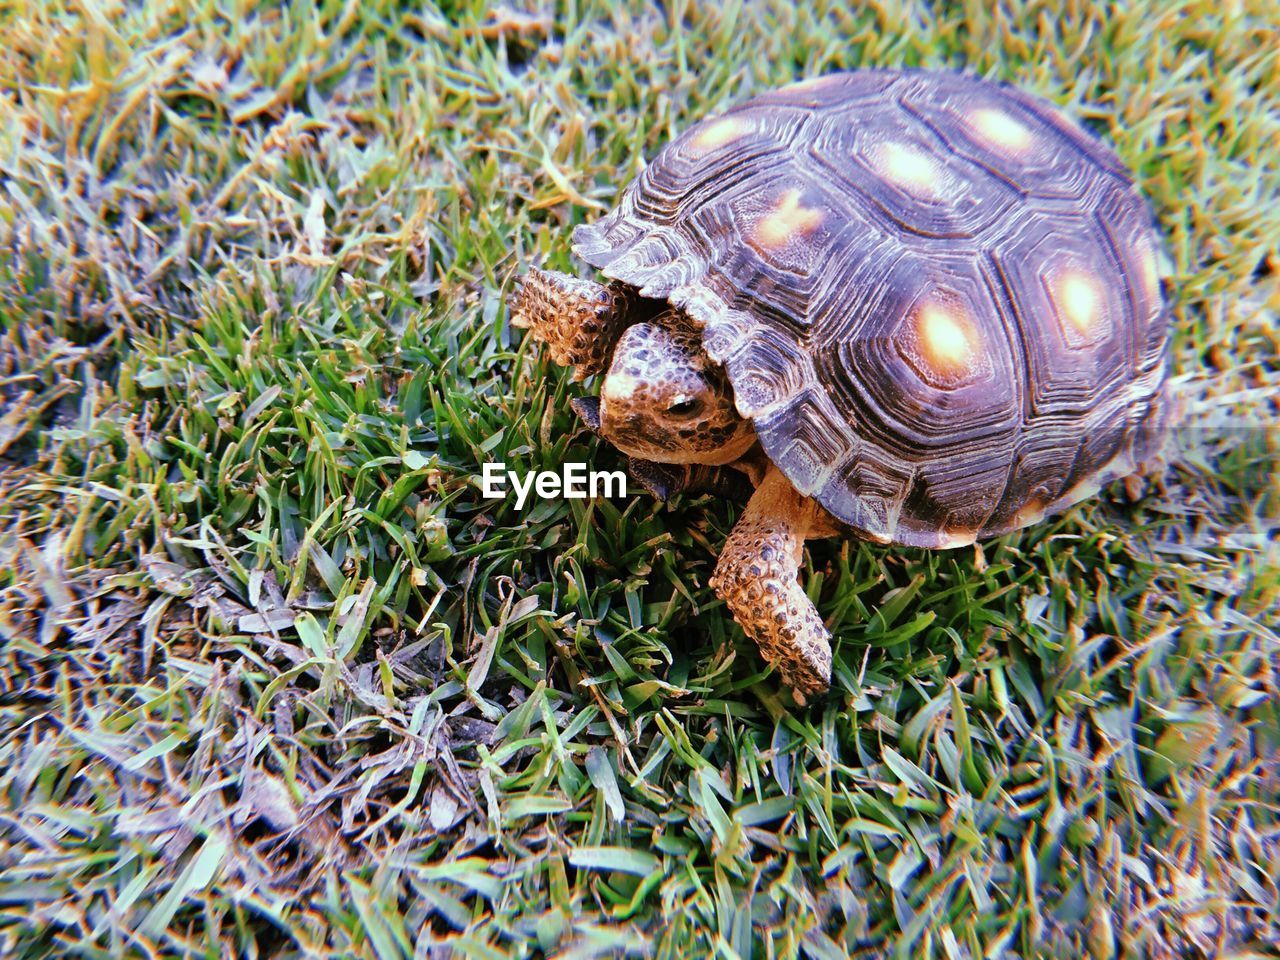 CLOSE-UP OF A TURTLE ON GROUND